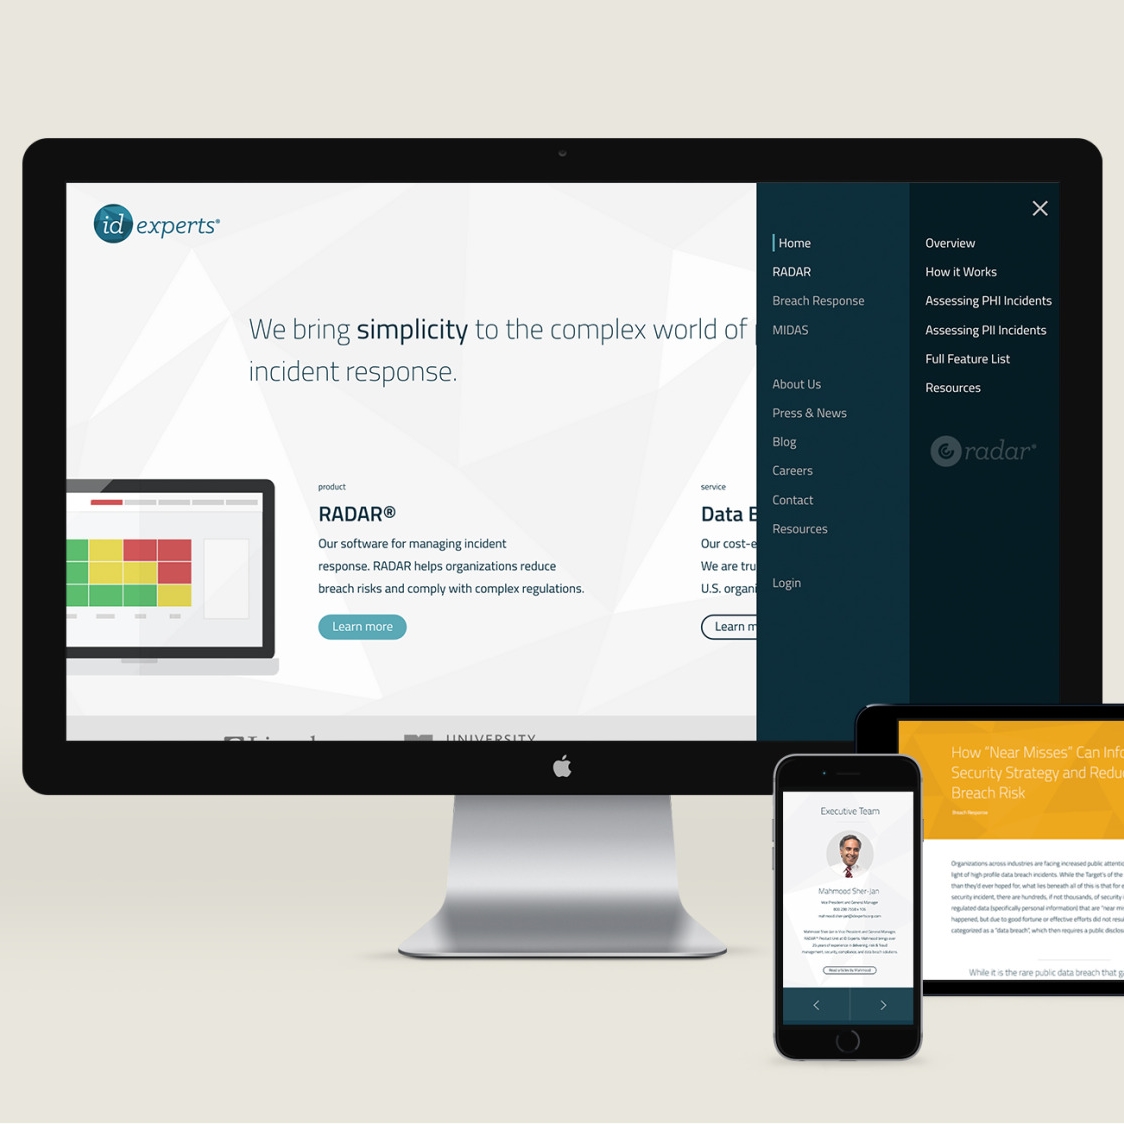 Minimal, responsive web design for B2B Enterprise Software and Services company